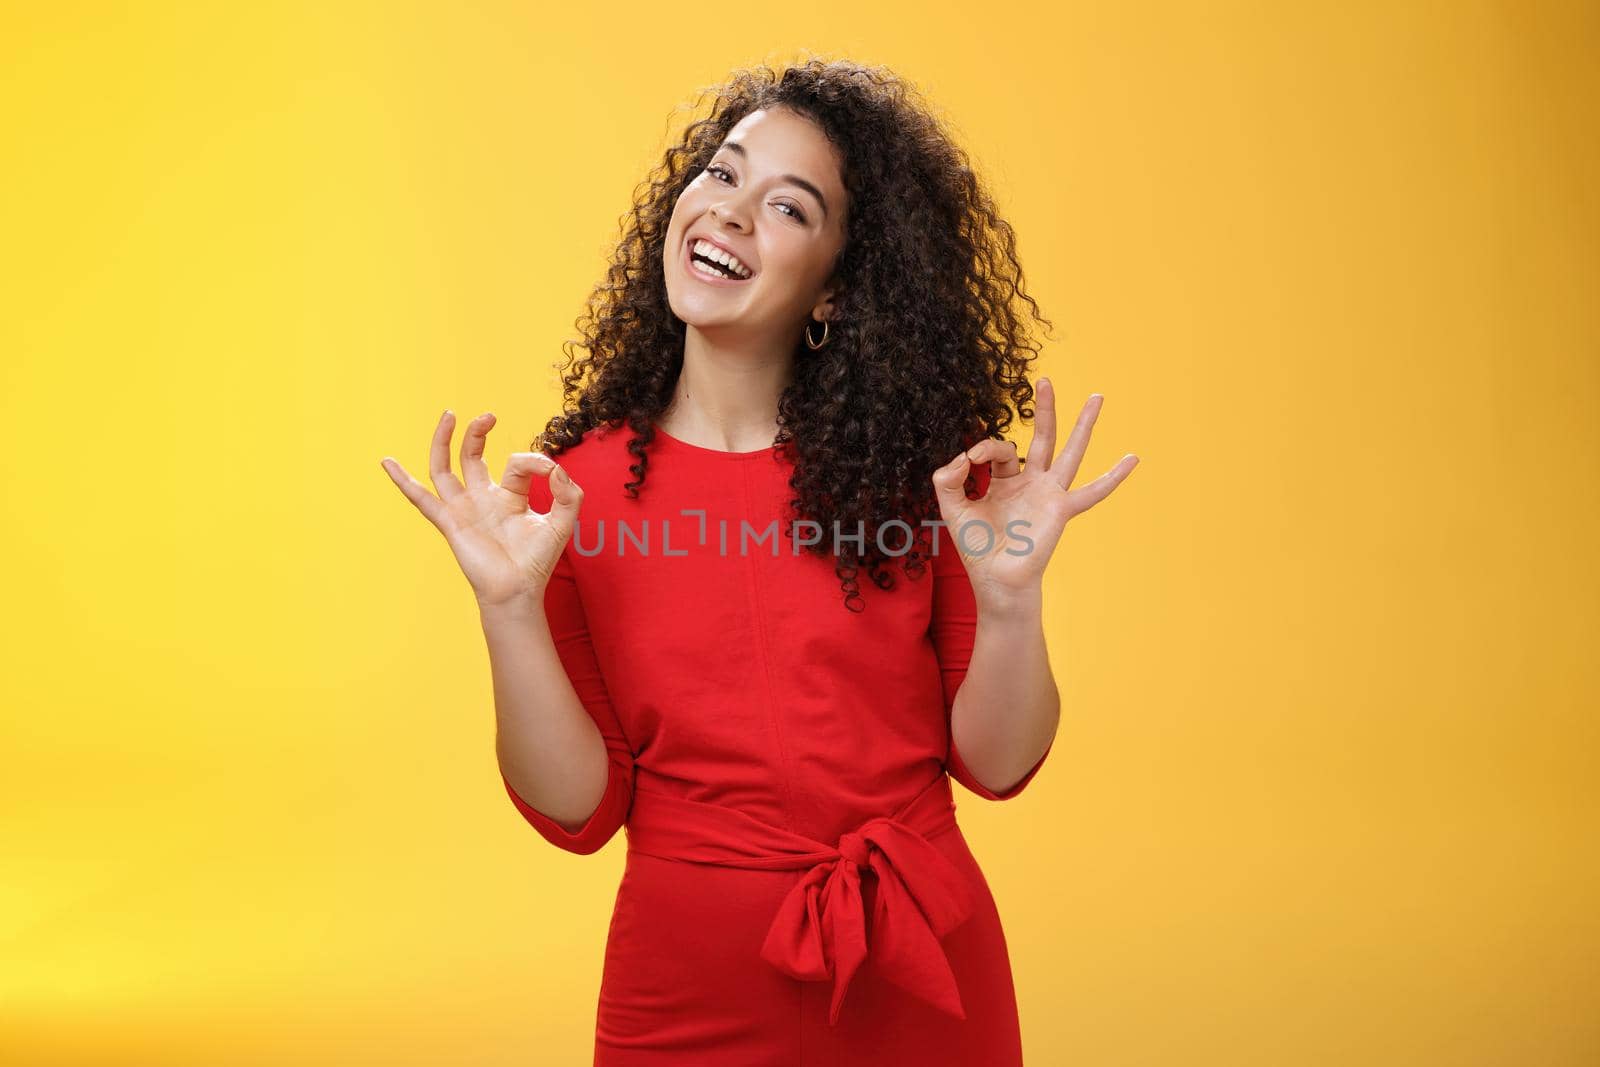 Charming girl living dream standing happy and satisfied as liking new apartment rent with boyfriend showing okay gesture and tilting head with broad smile approving cool place over yellow background.